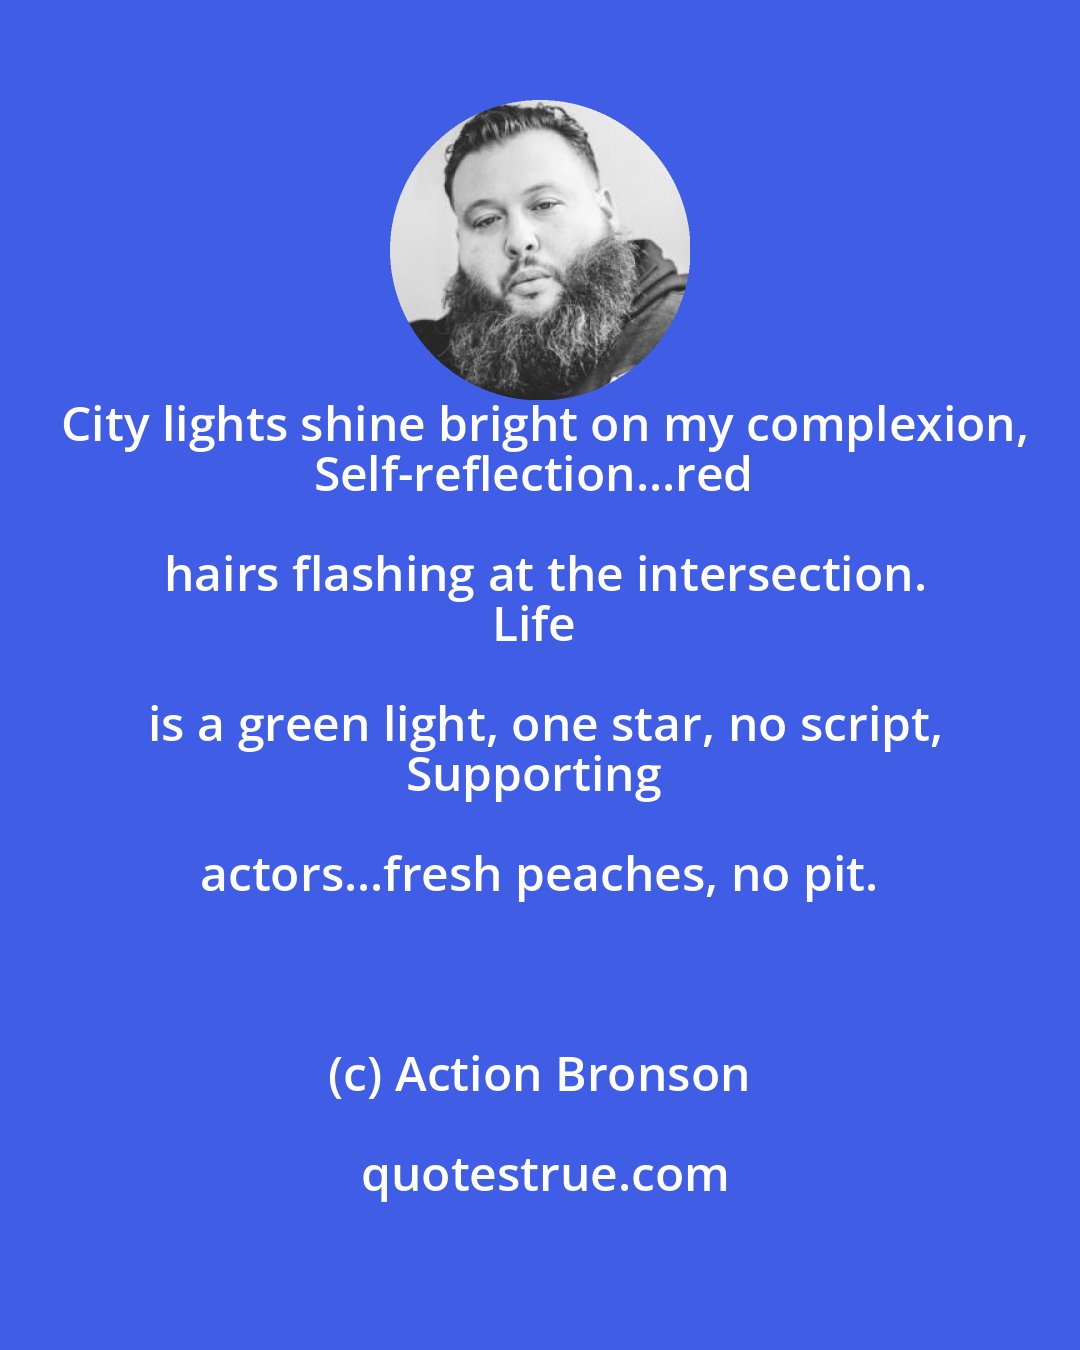 Action Bronson: City lights shine bright on my complexion,
Self-reflection...red hairs flashing at the intersection.
Life is a green light, one star, no script,
Supporting actors...fresh peaches, no pit.